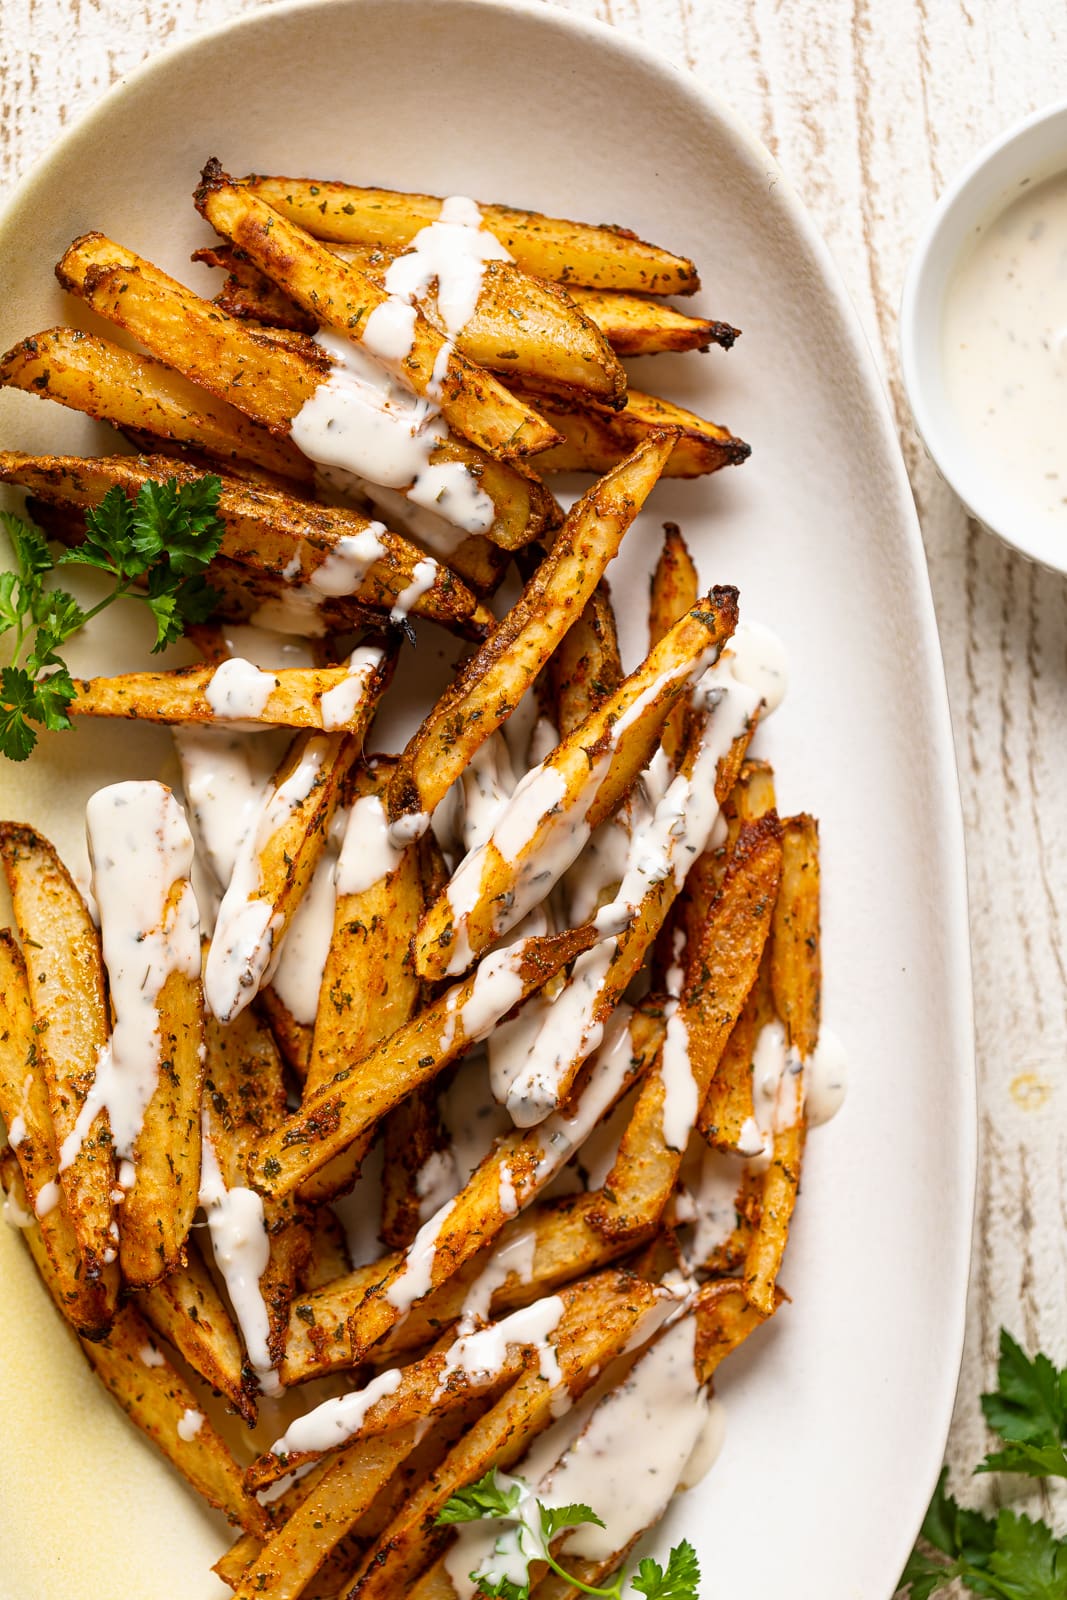 Plate of Seasoned French Fries drizzled with ranch sauce